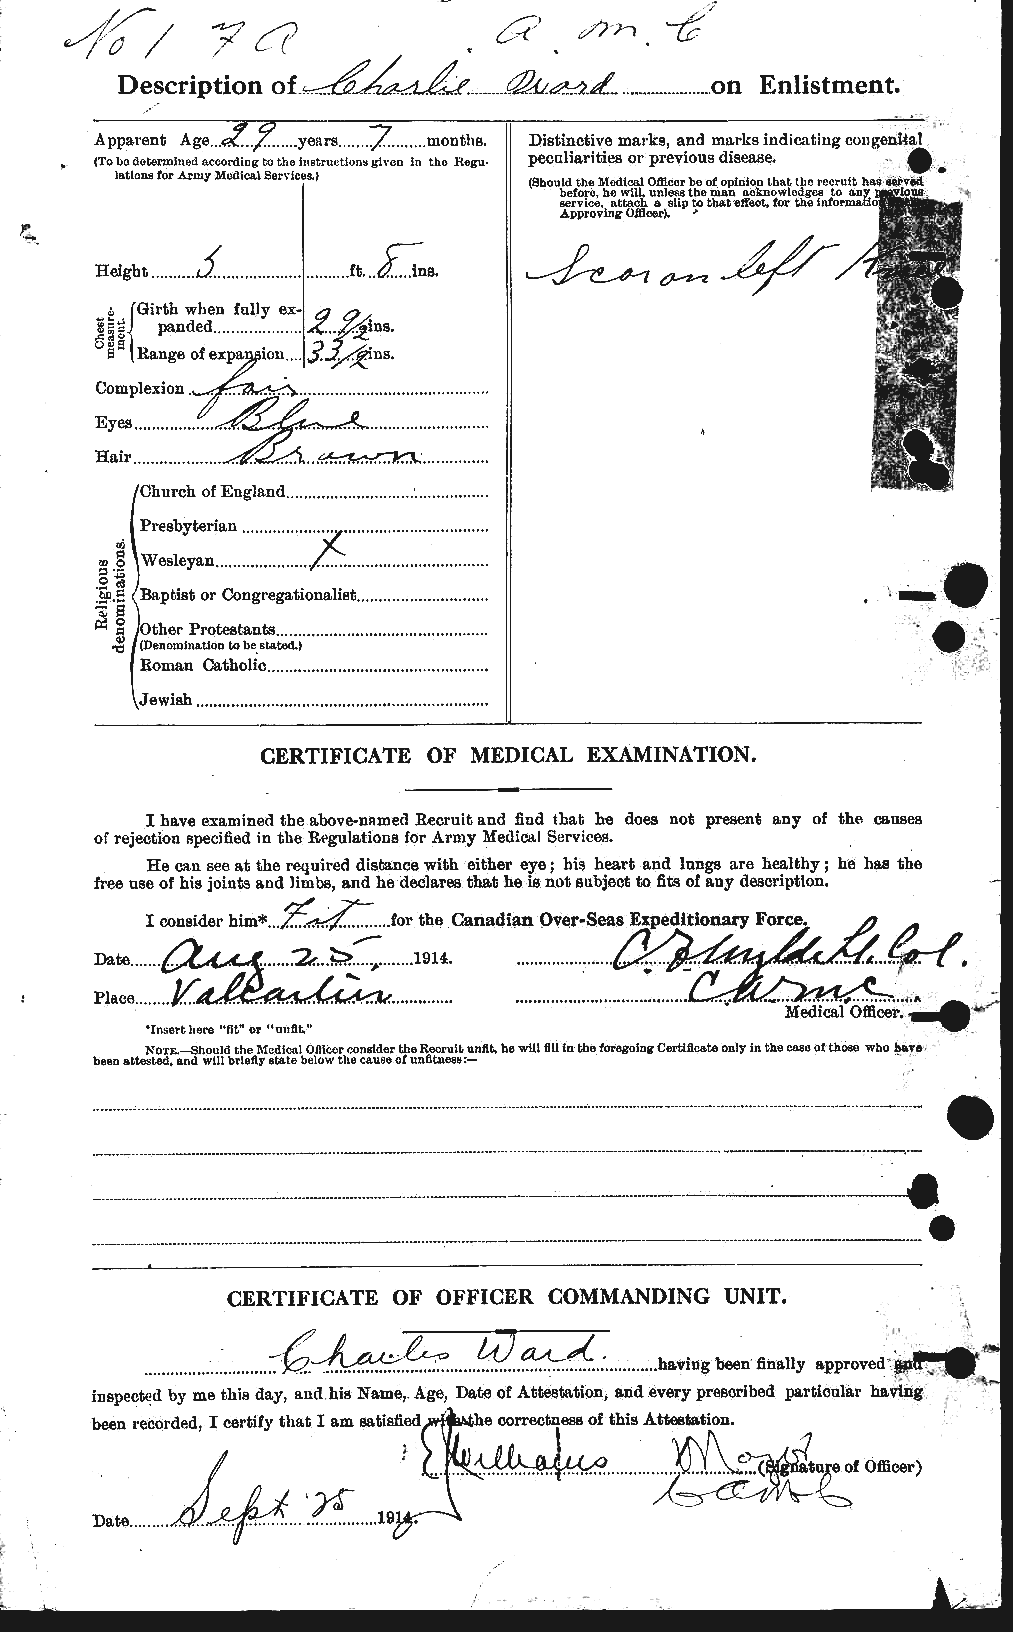 Personnel Records of the First World War - CEF 657568b